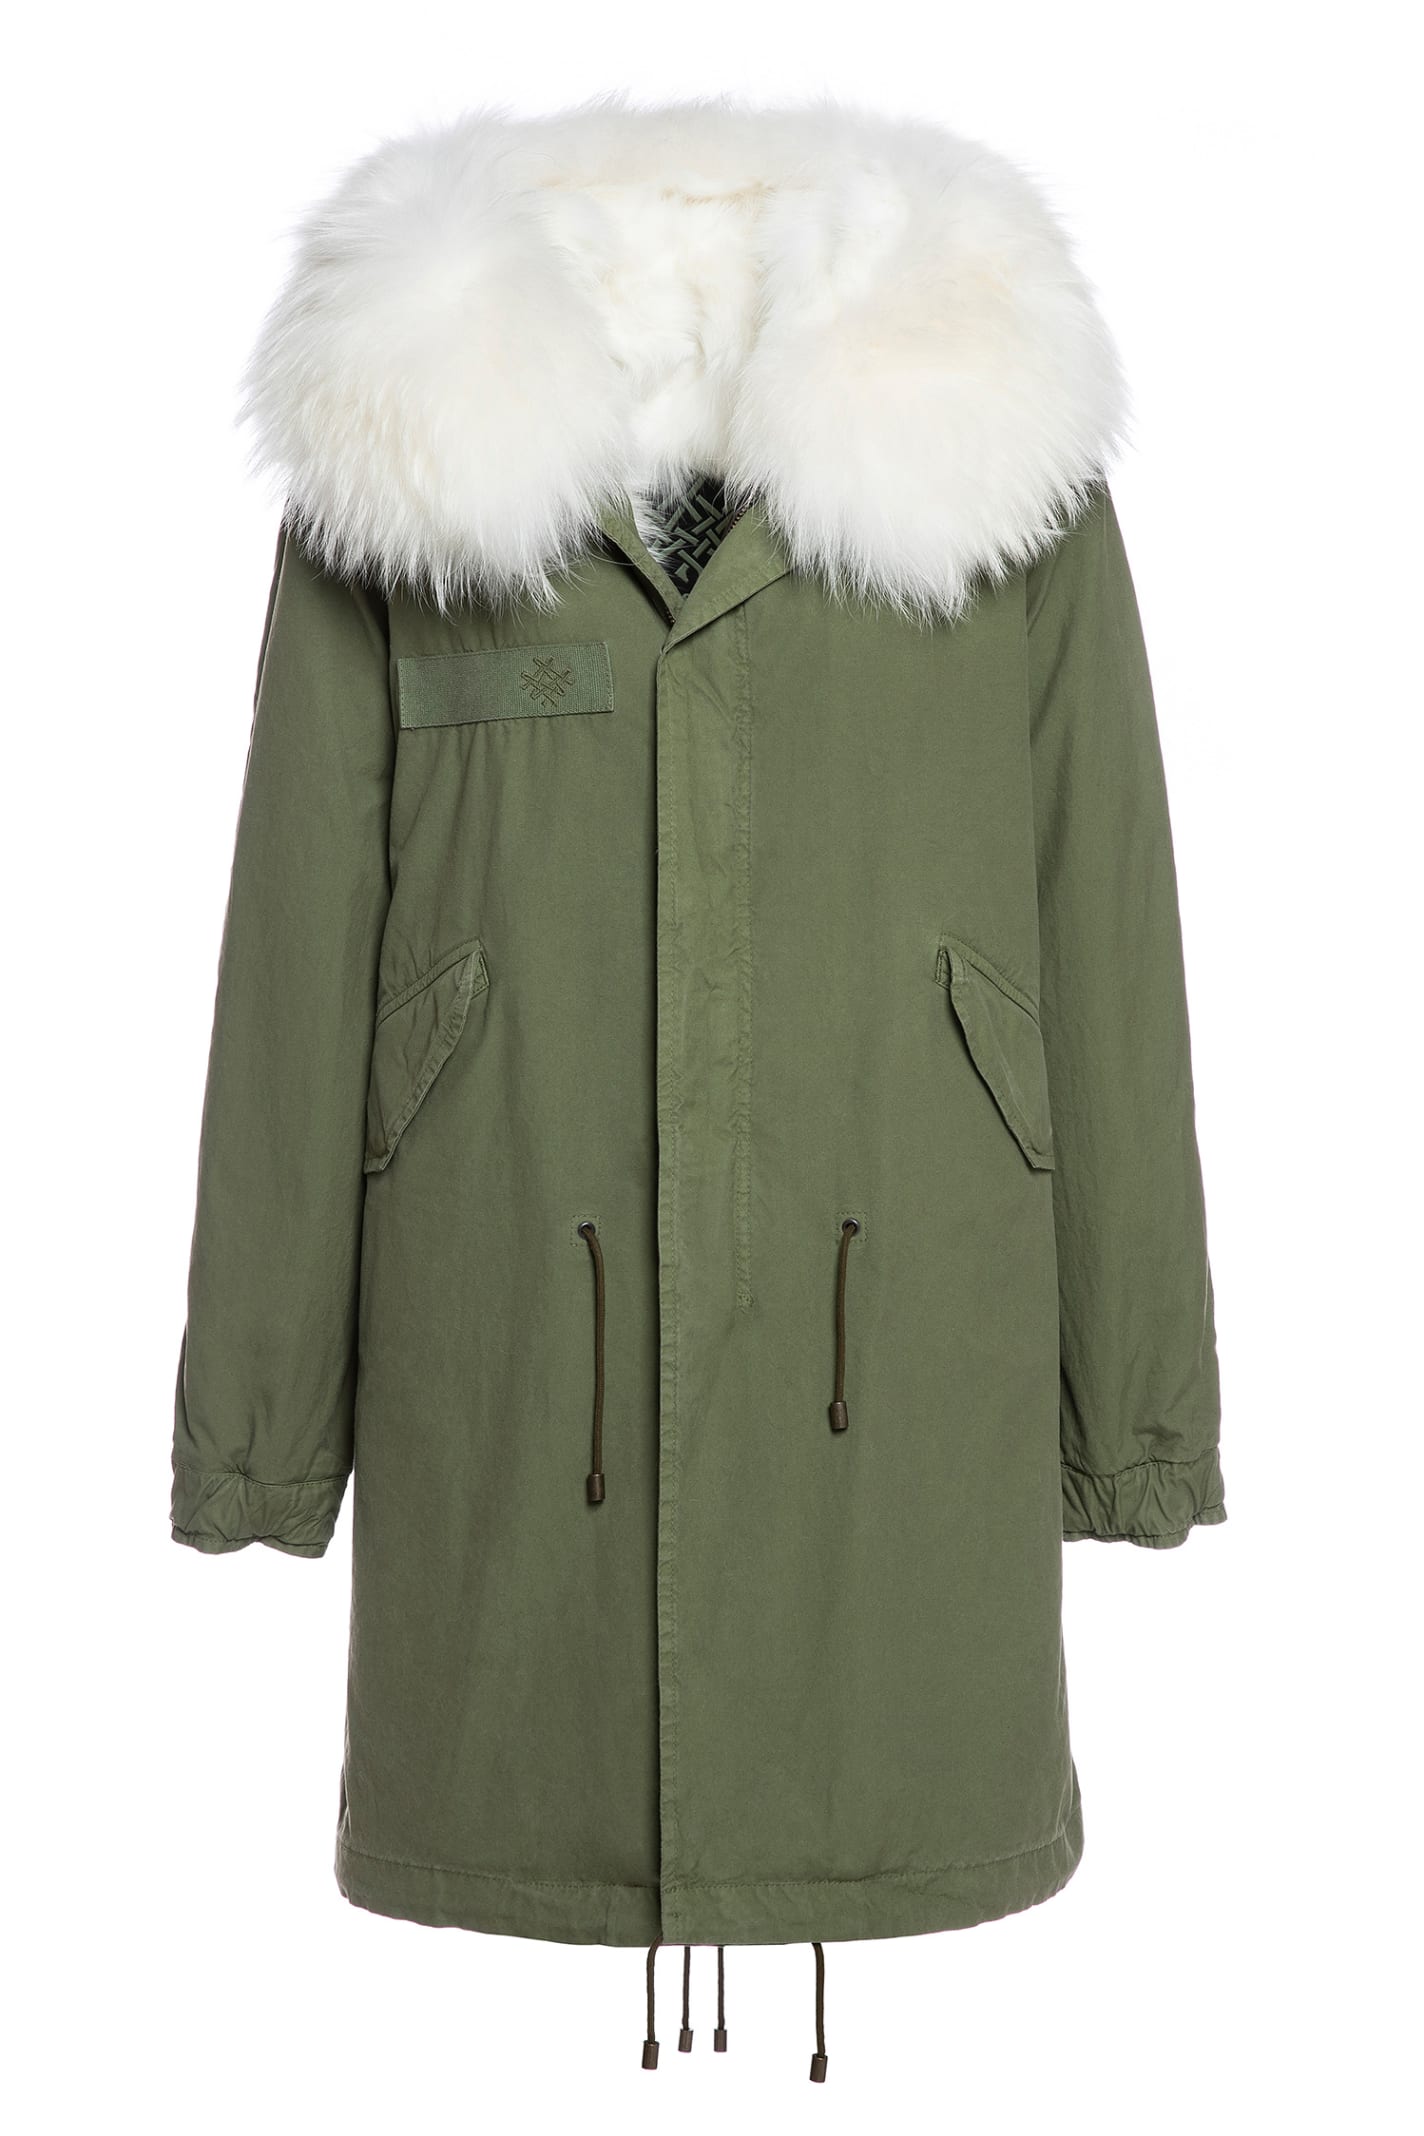 Mr & Mrs Italy Exclusive Fw20 Icon Parka: Army Cotton Canvas Parka With Fox Fur Lining